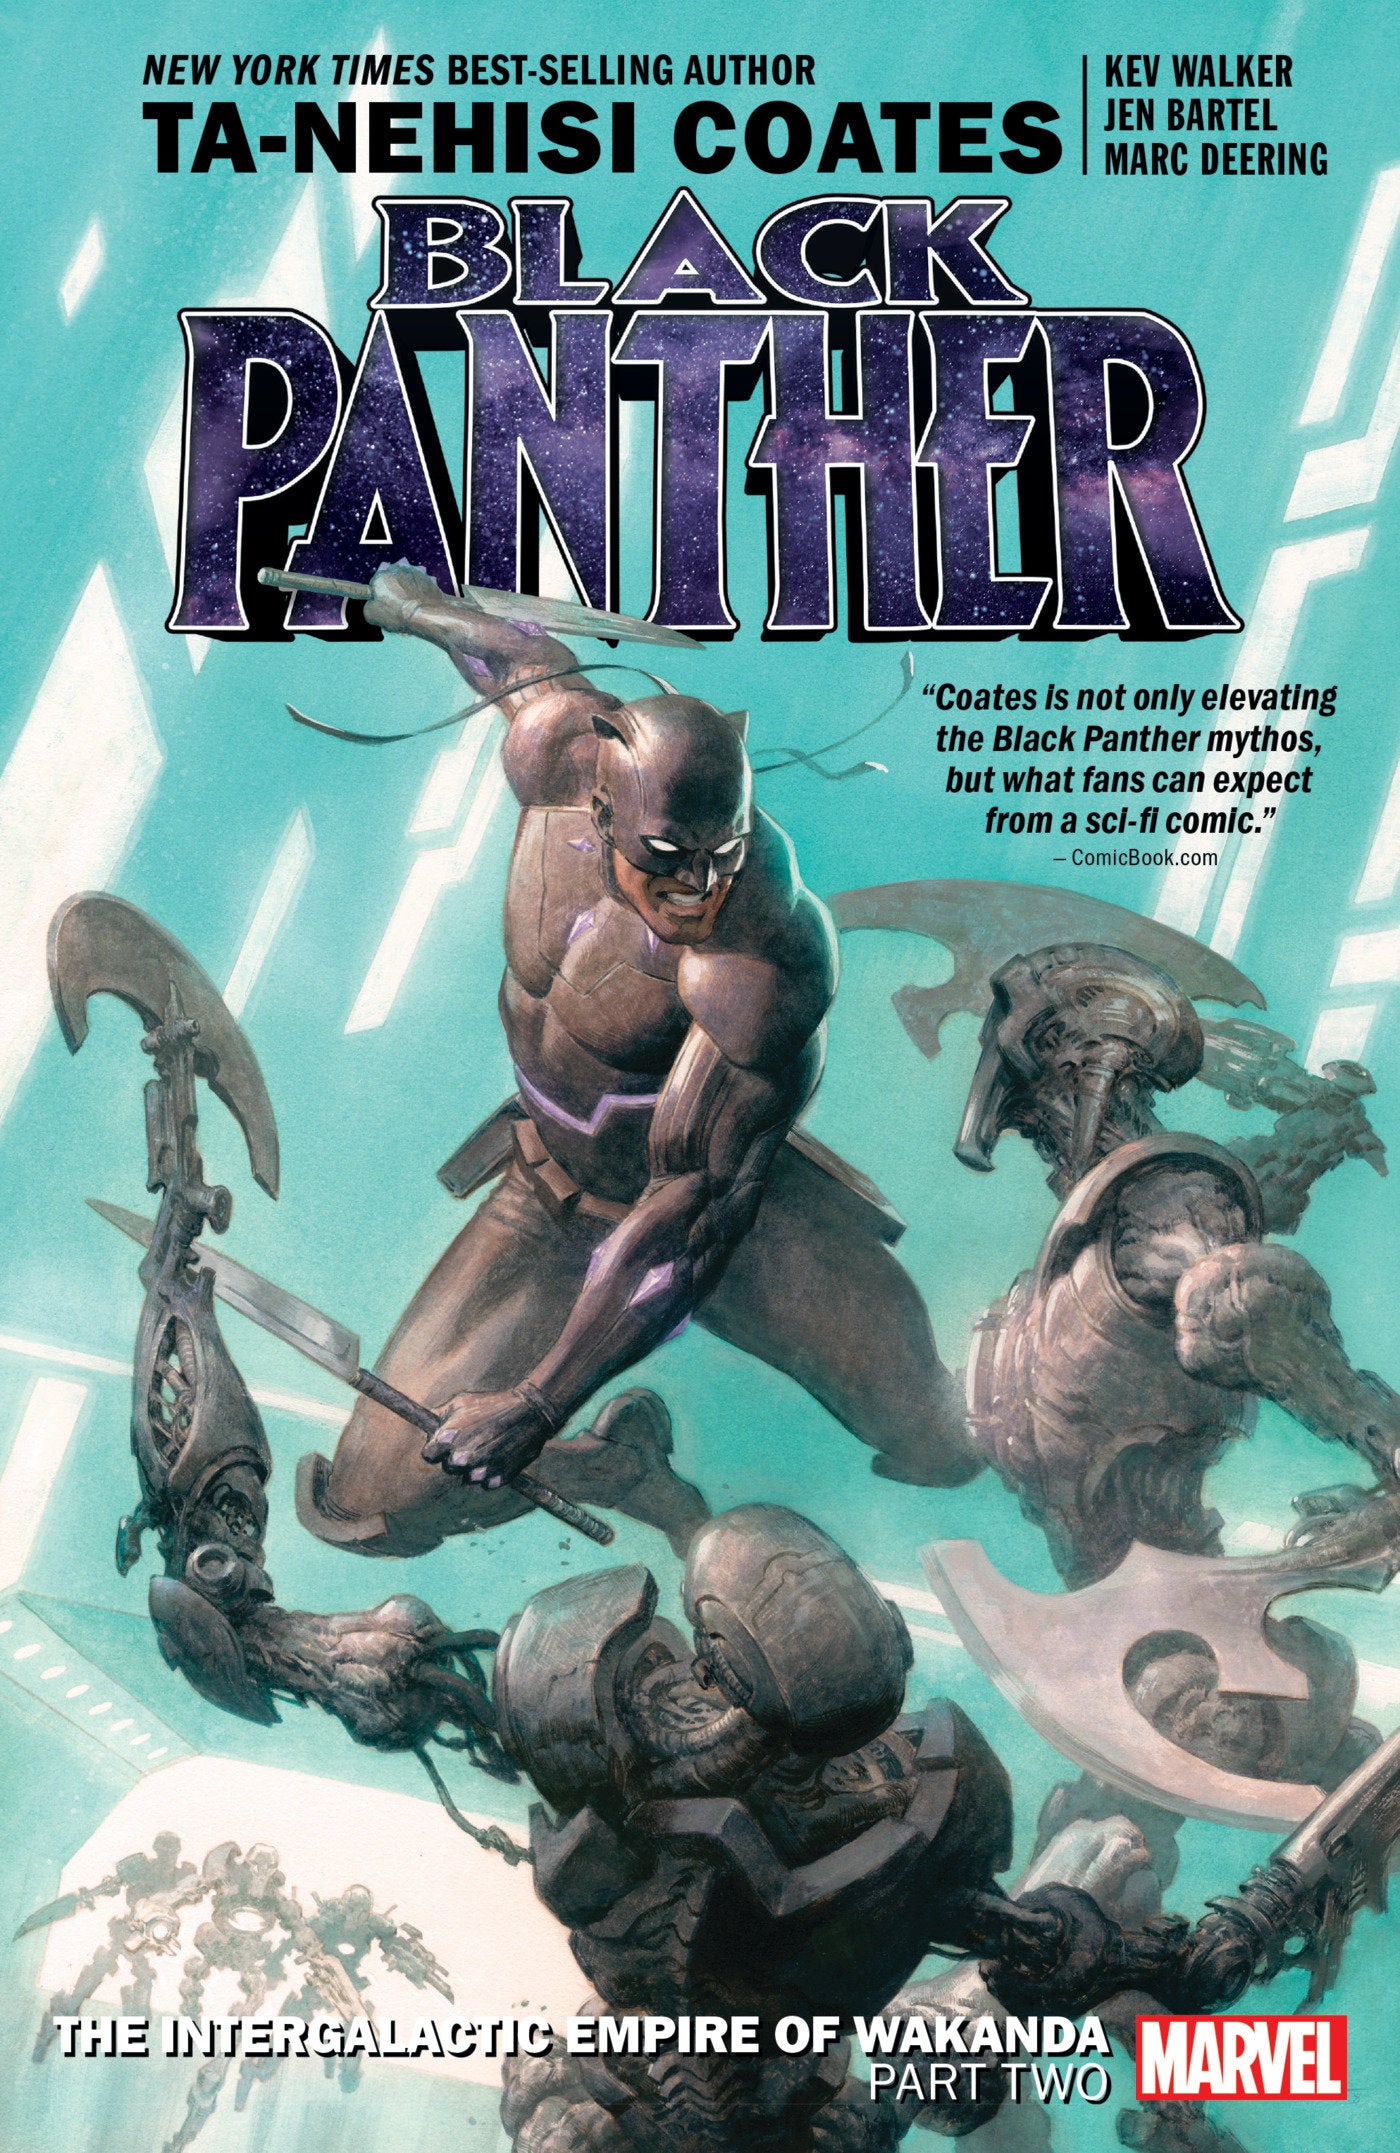 BLACK PANTHER BOOK 7: THE INTERGALACTIC EMPIRE OF WAKANDA PART TWO TRADE PAPERBACK